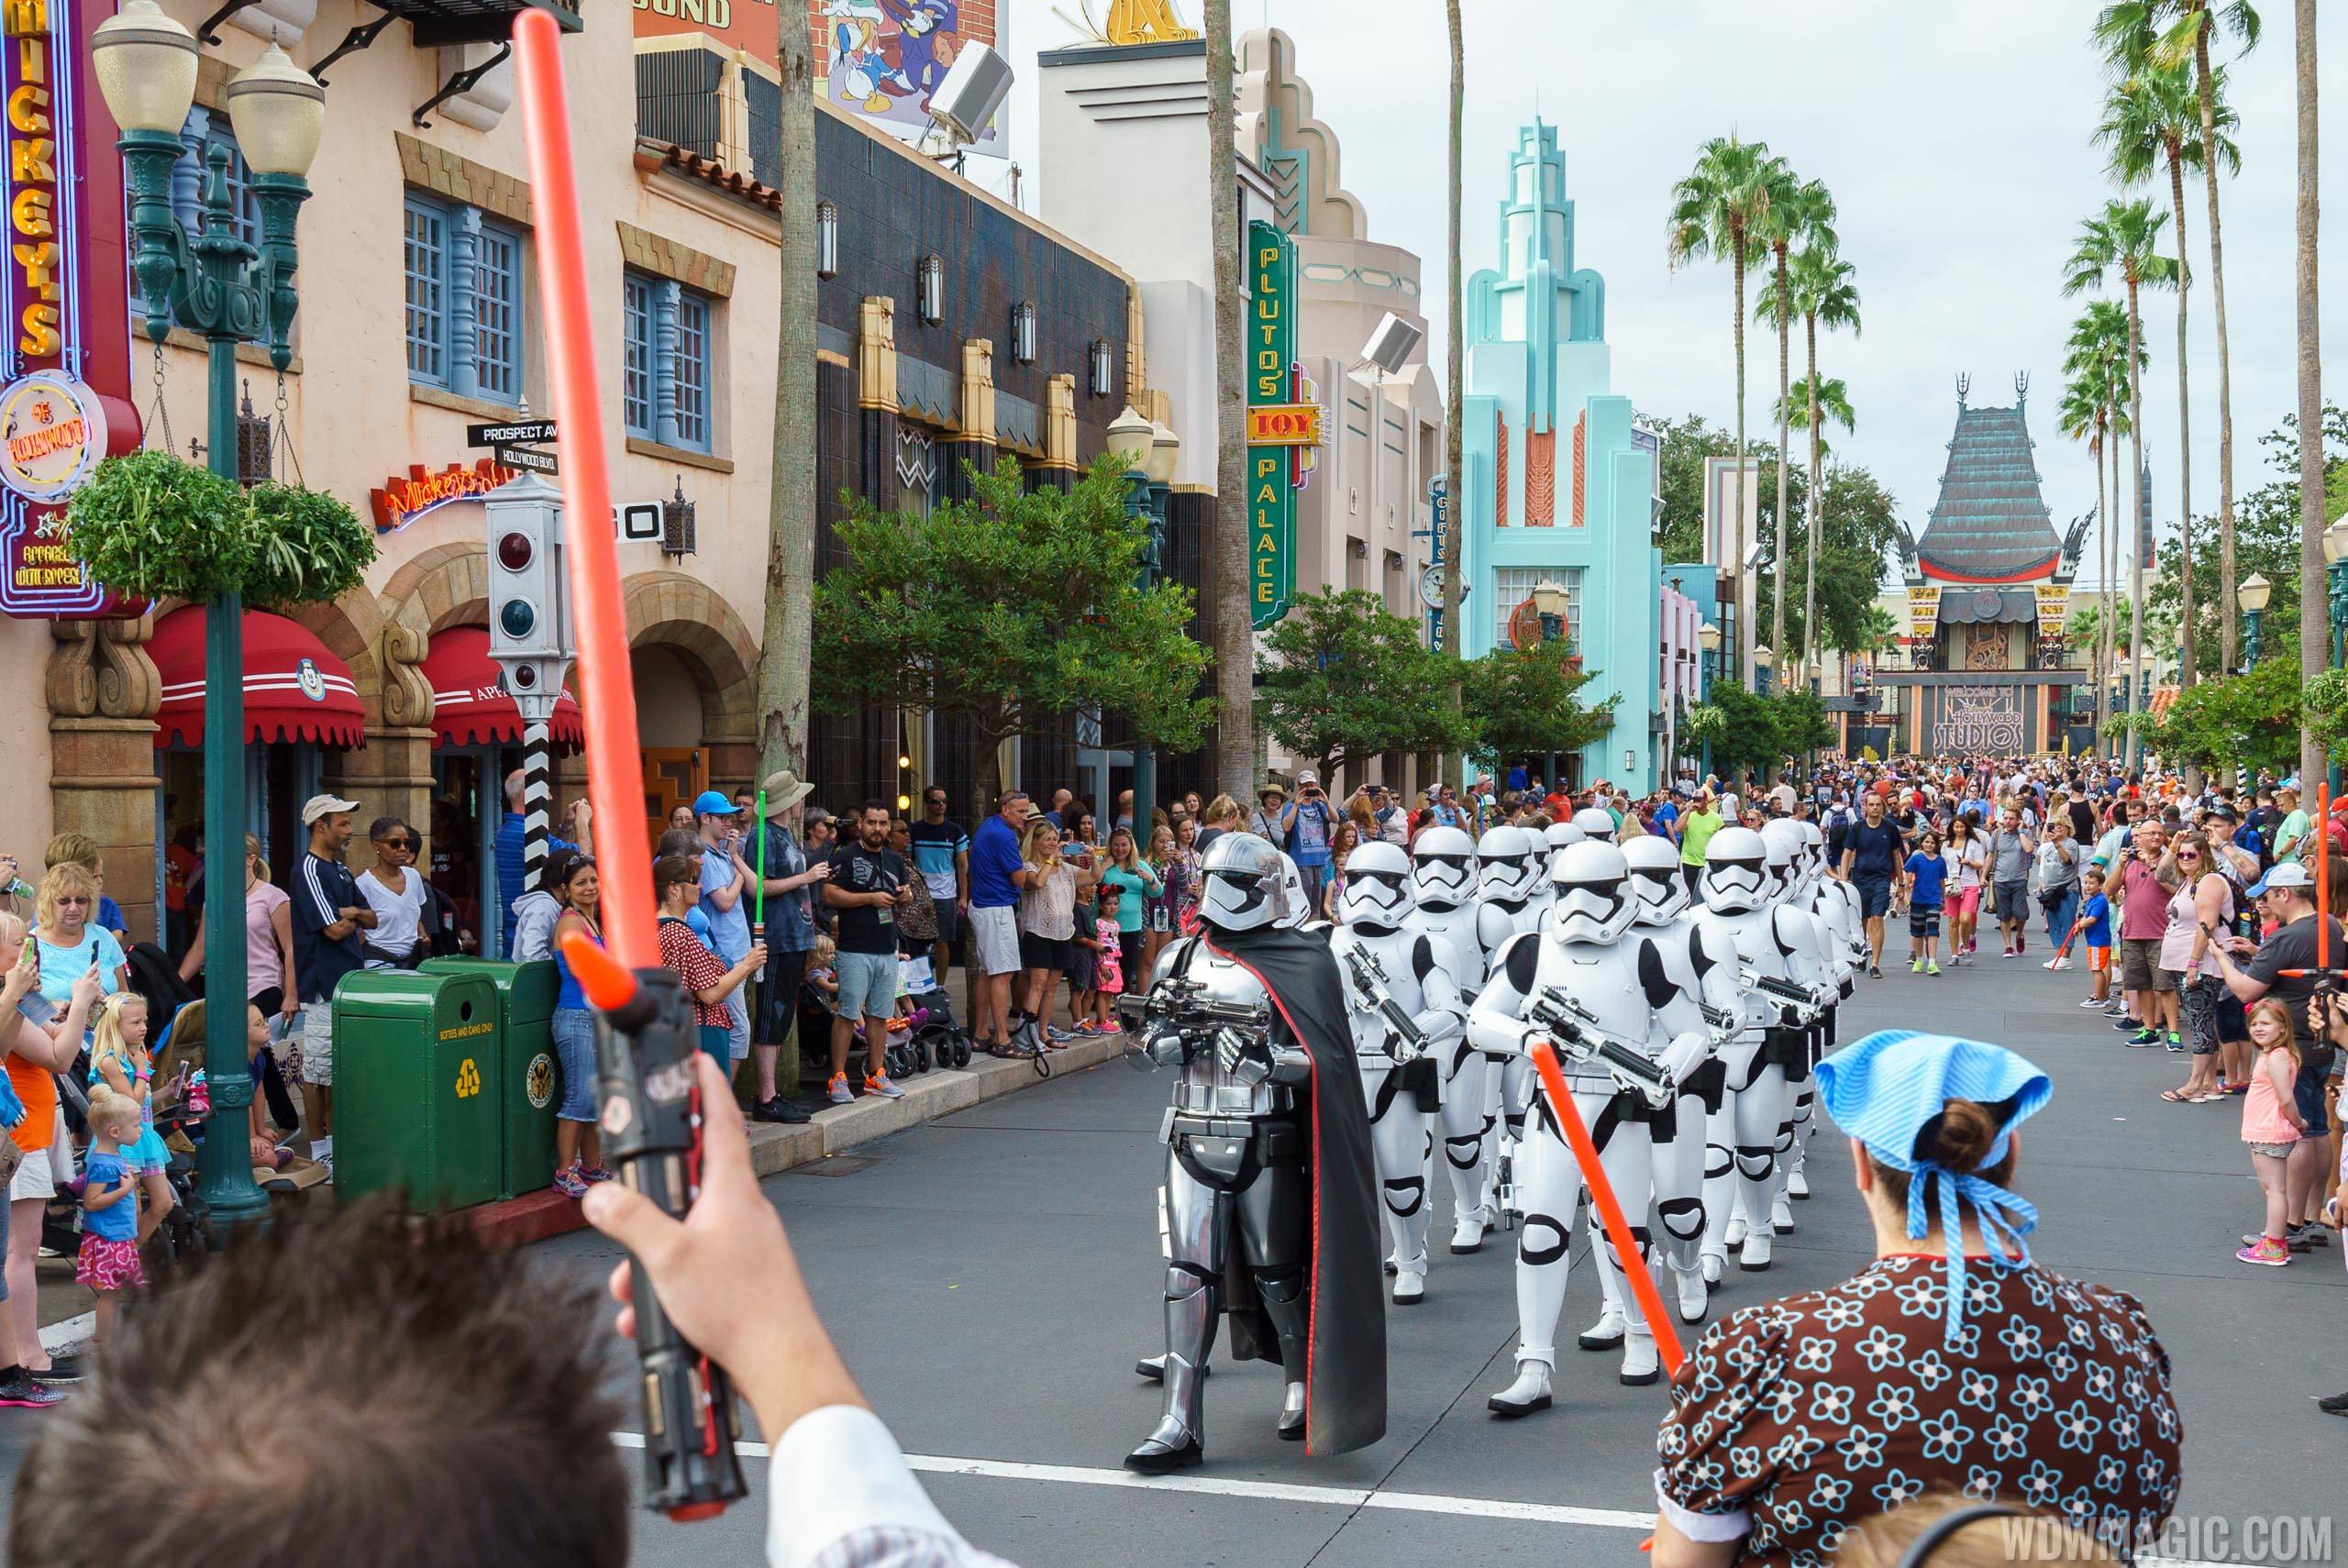 March of the First Order coming to an end at Disney's Hollywood Studios?